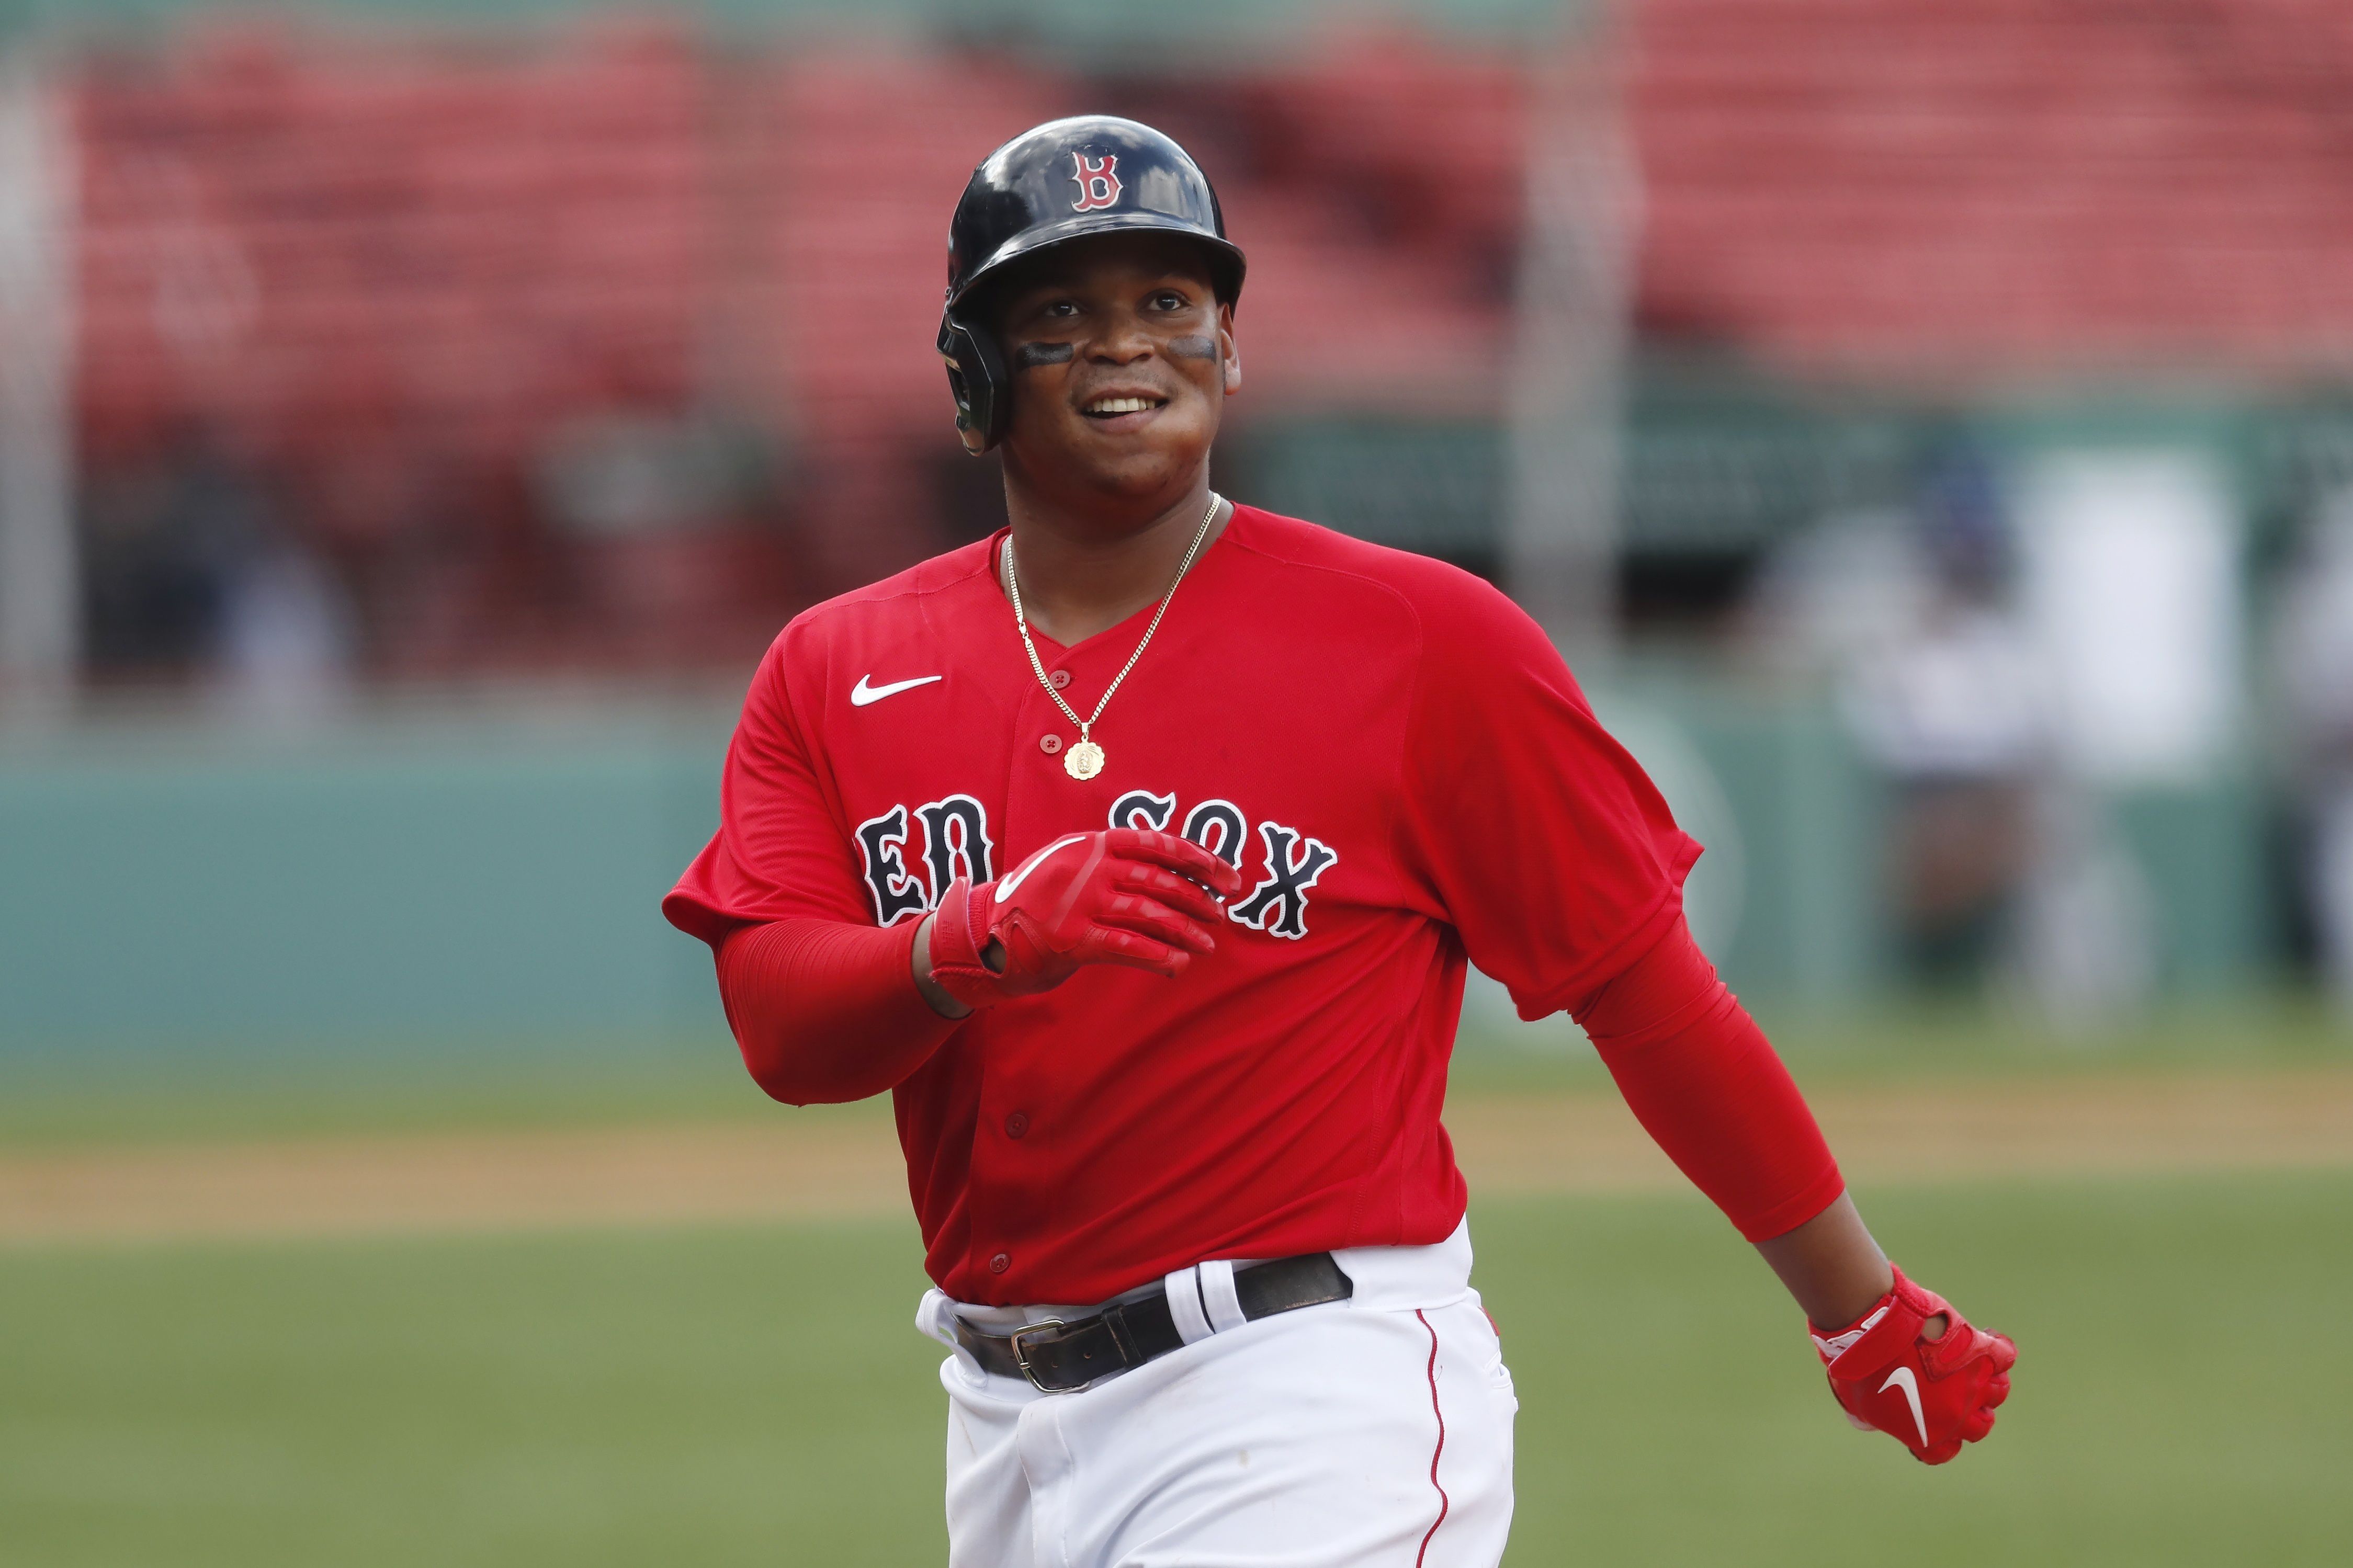 Rafael Devers' home run could spell end of Red Sox star's season